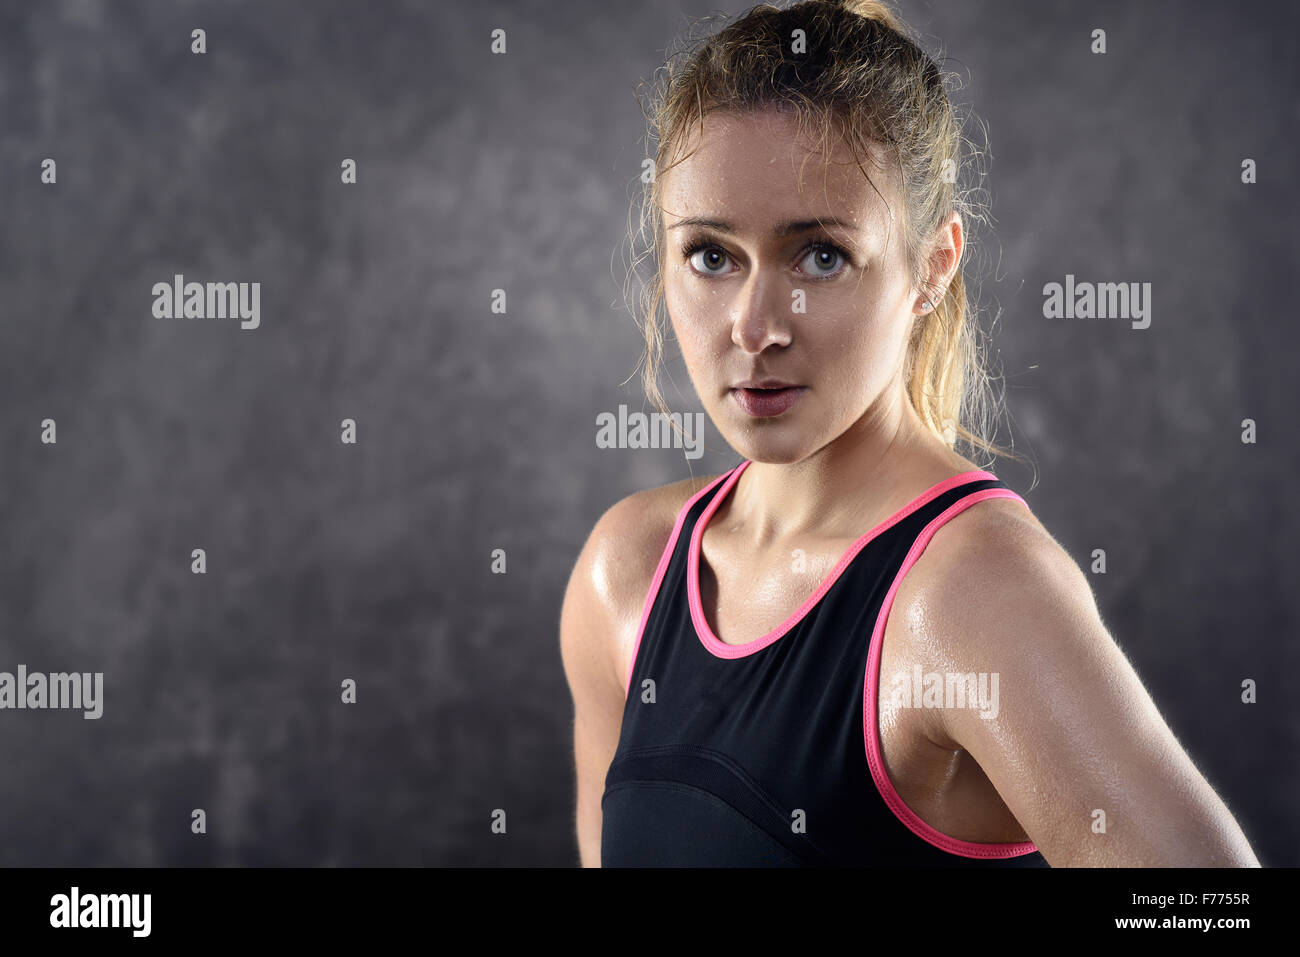 Head and Shoulders Portrait of a sweating Athletic Blond Woman Wearing Pink and Black Tank Top and Standing with Hands on Hips i Stock Photo